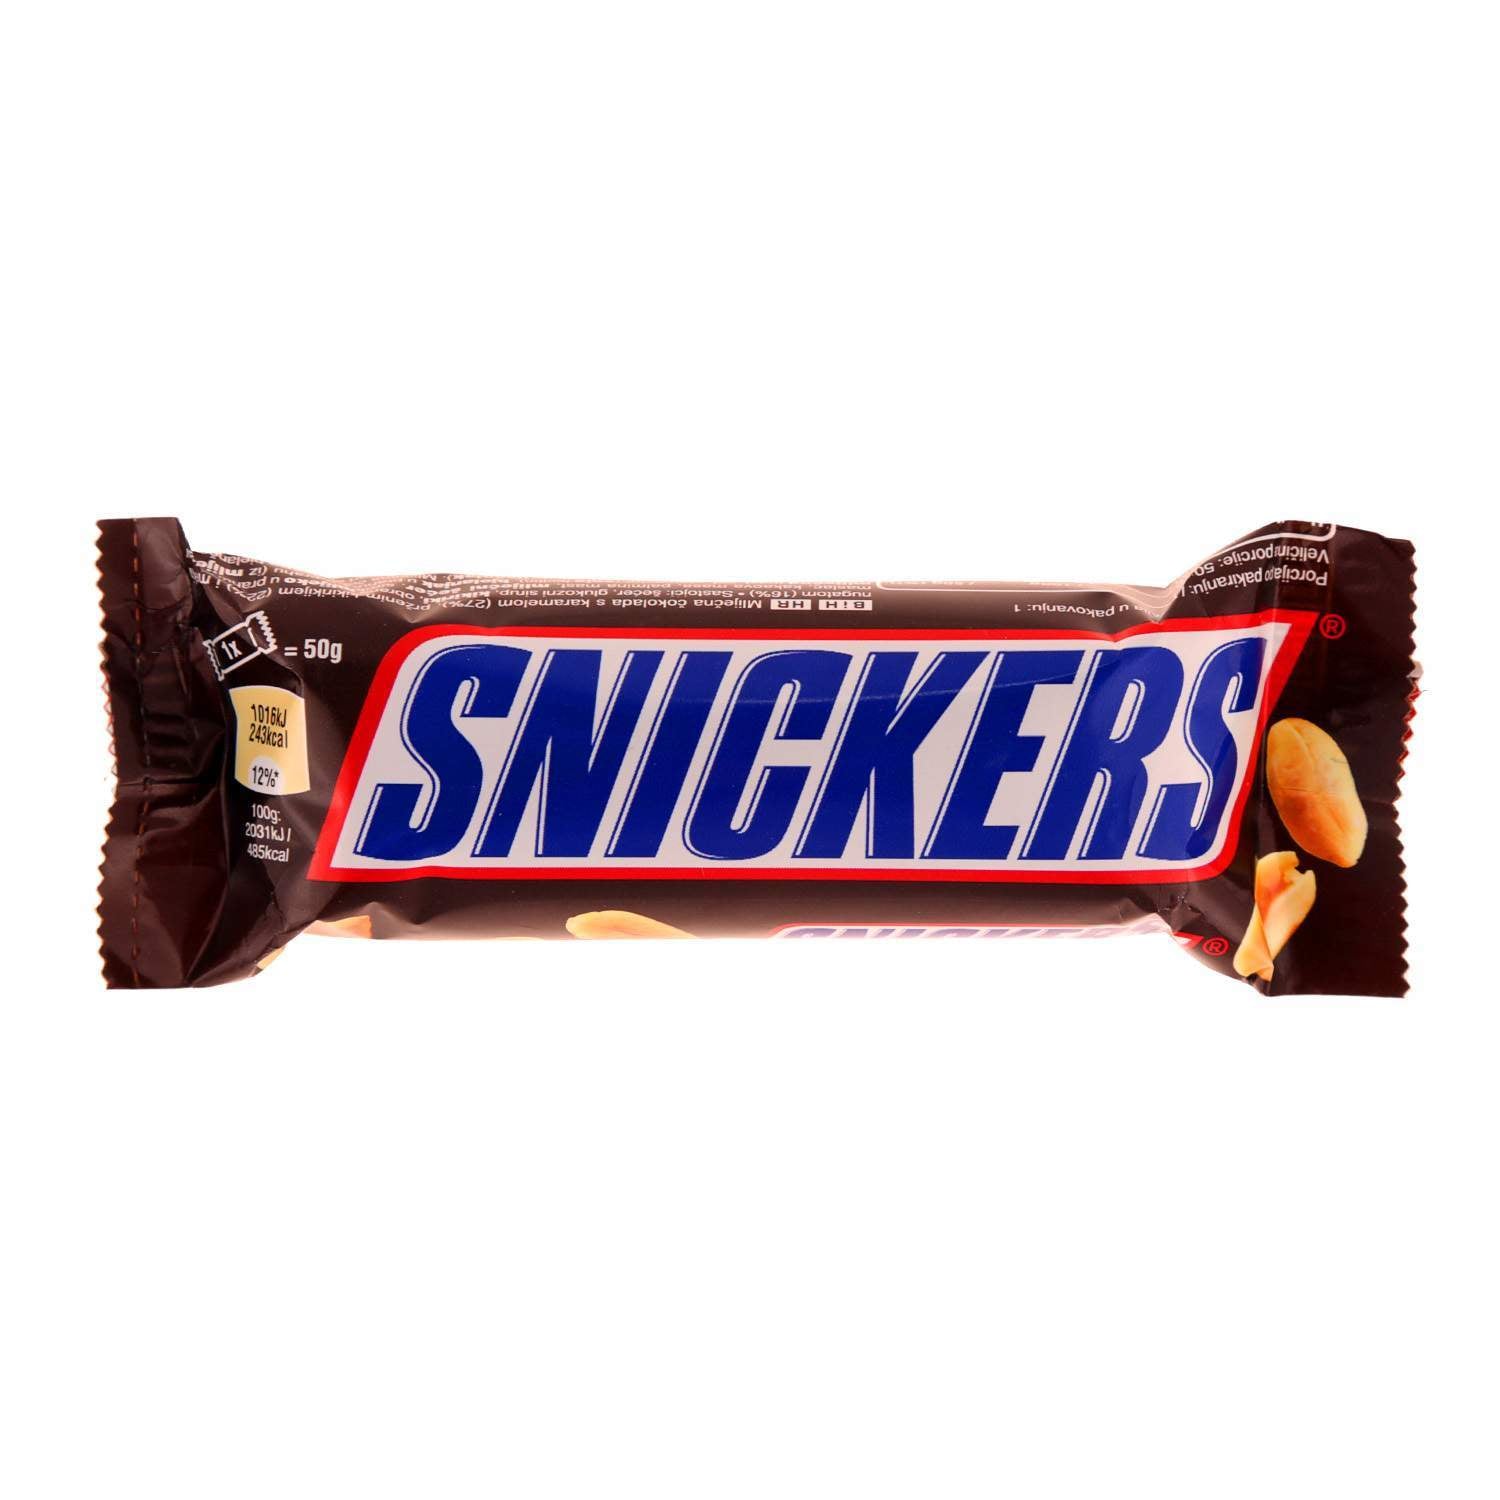 aga>Snickers classic 50g